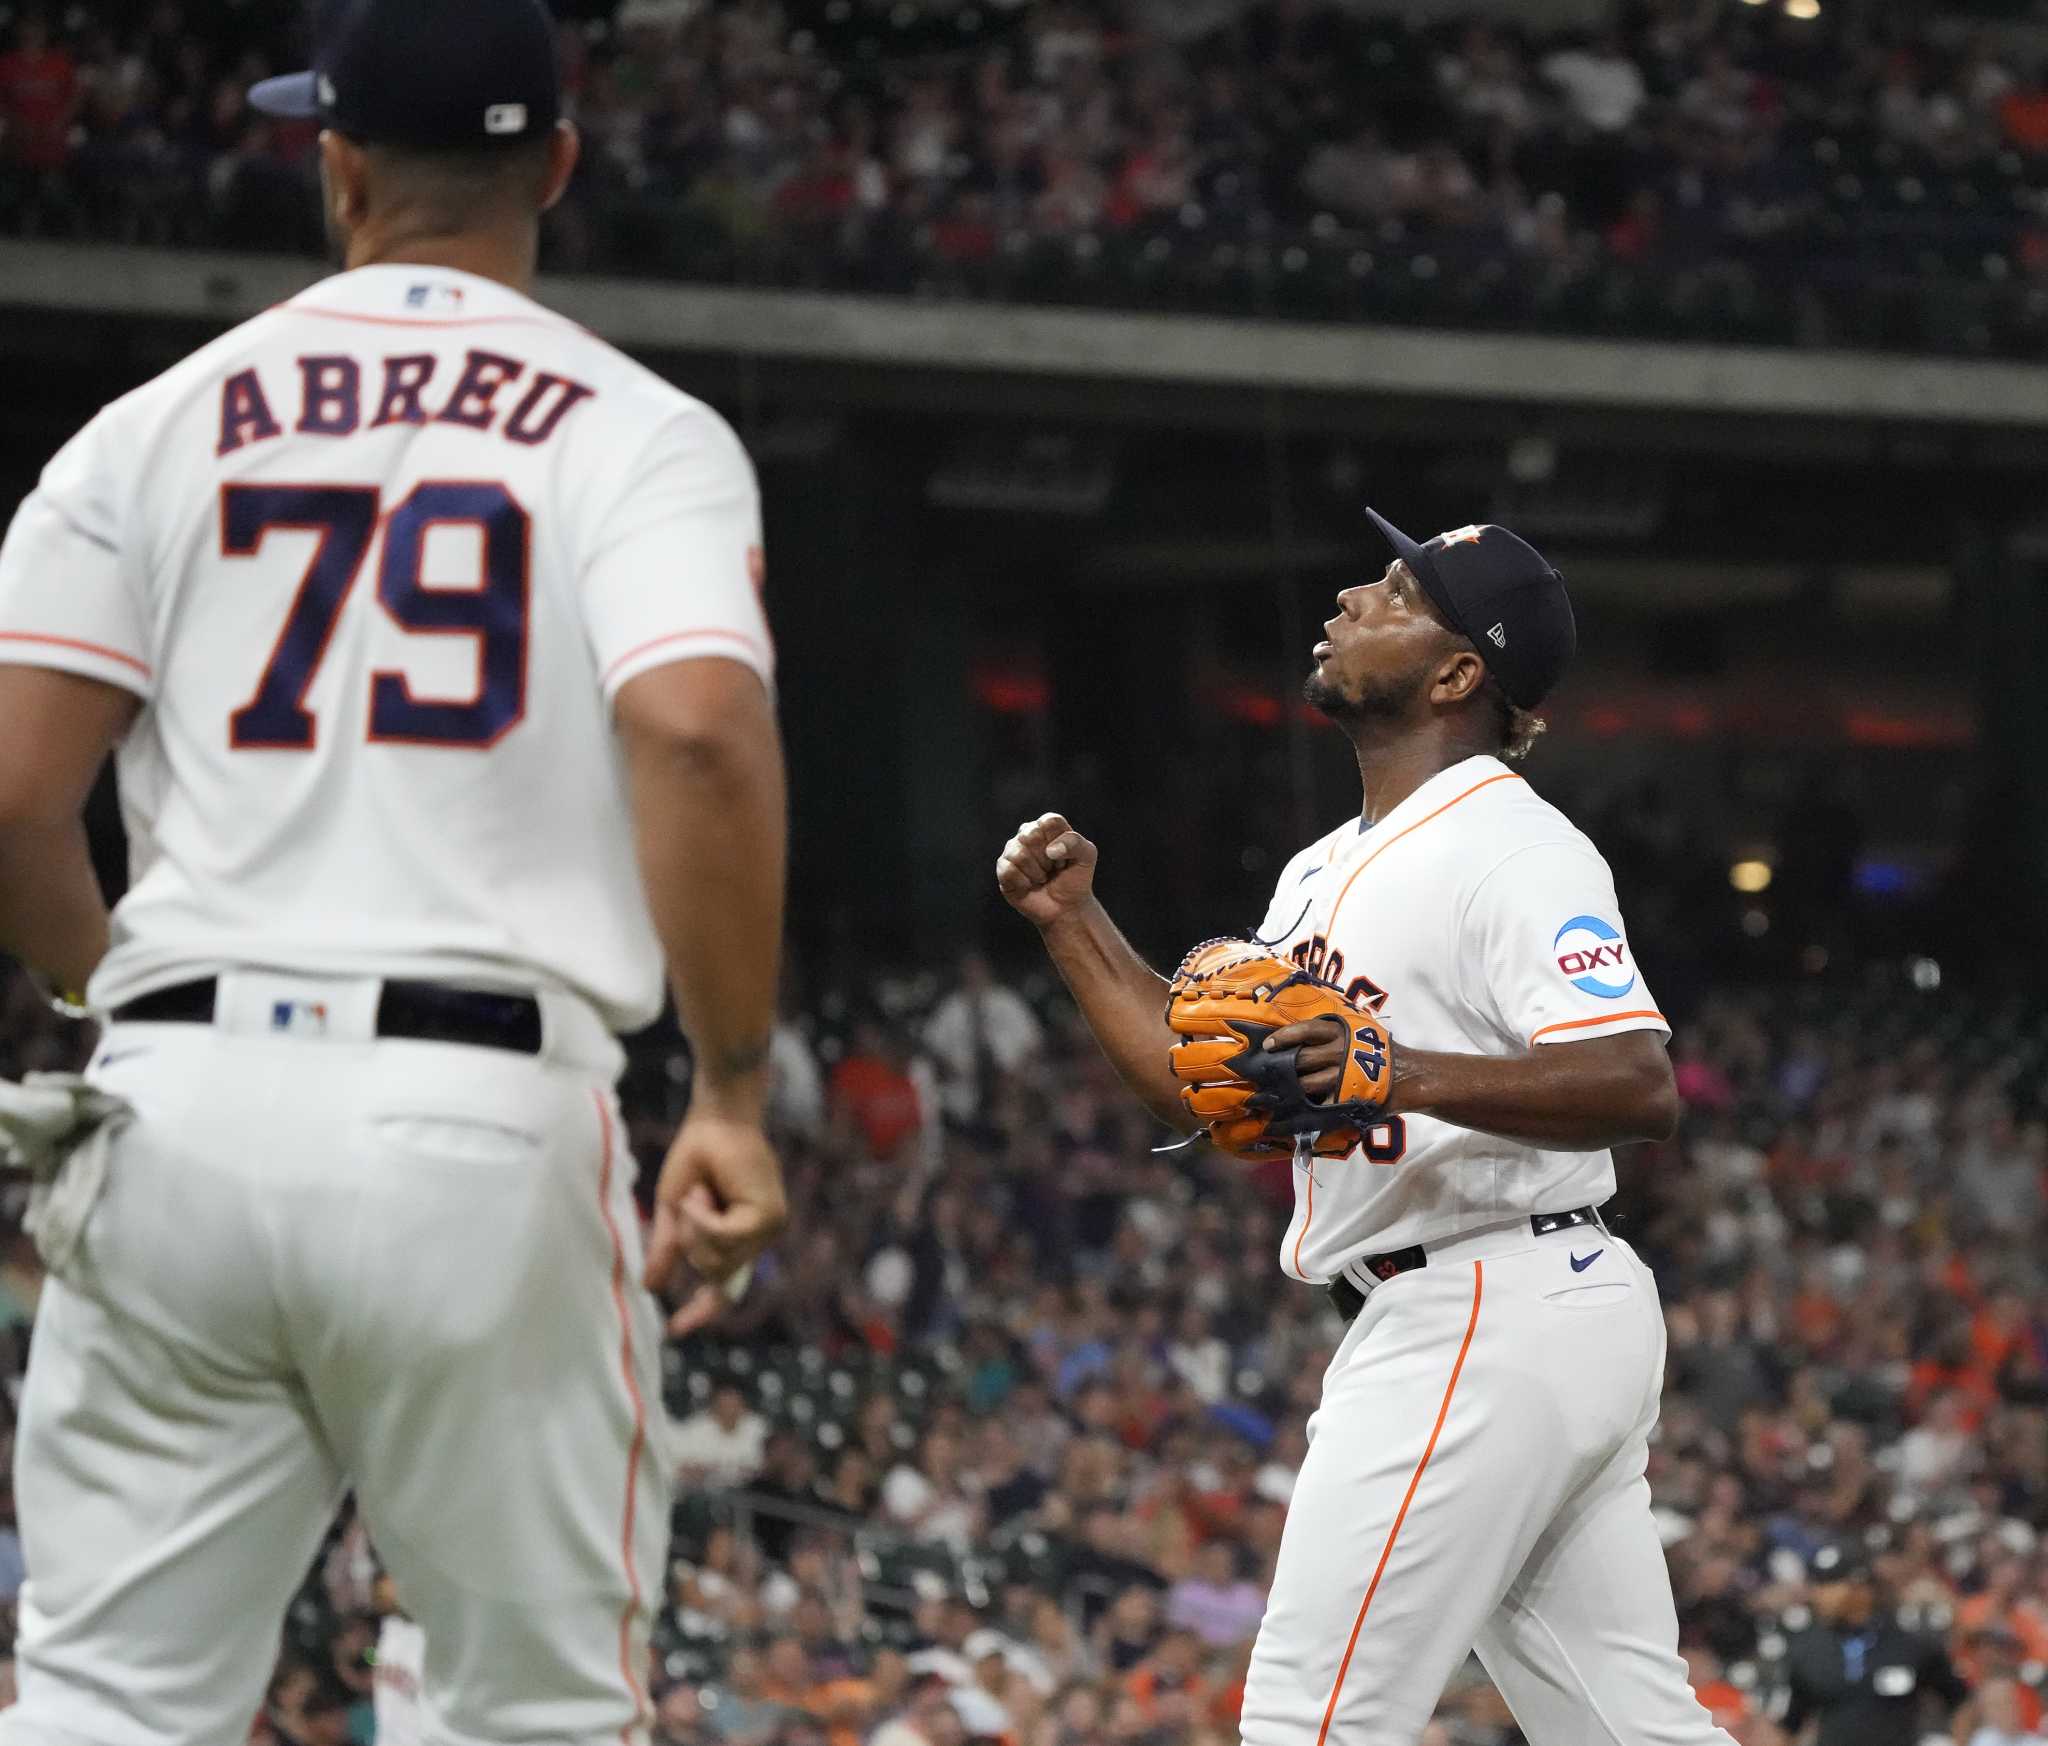 Why Astros are switching to 6-man rotation